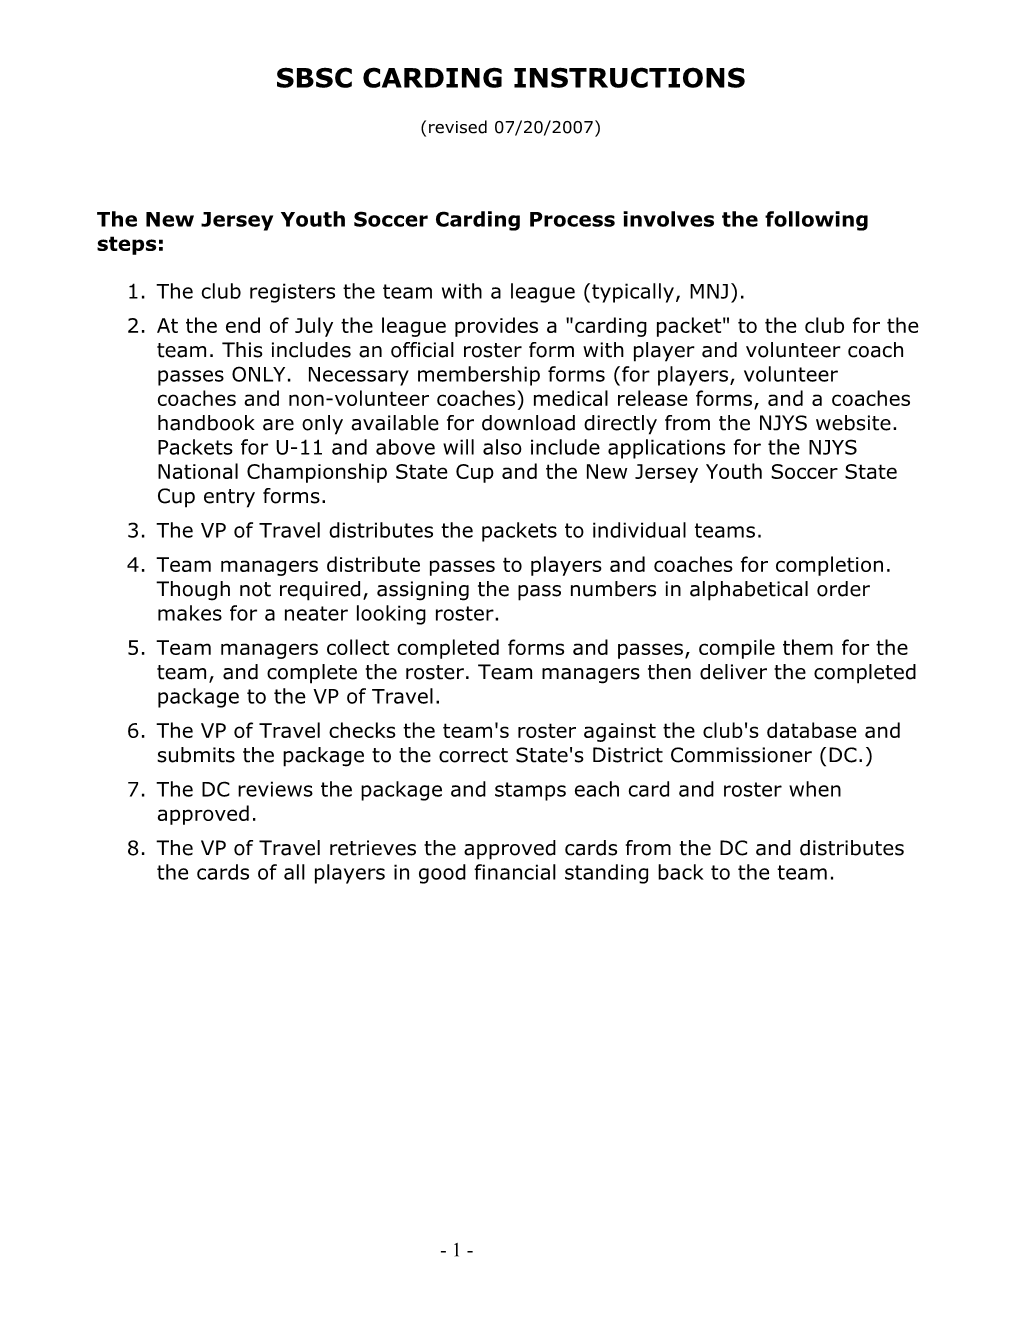 The New Jersey Youth Soccer Carding Process Involves the Following Steps